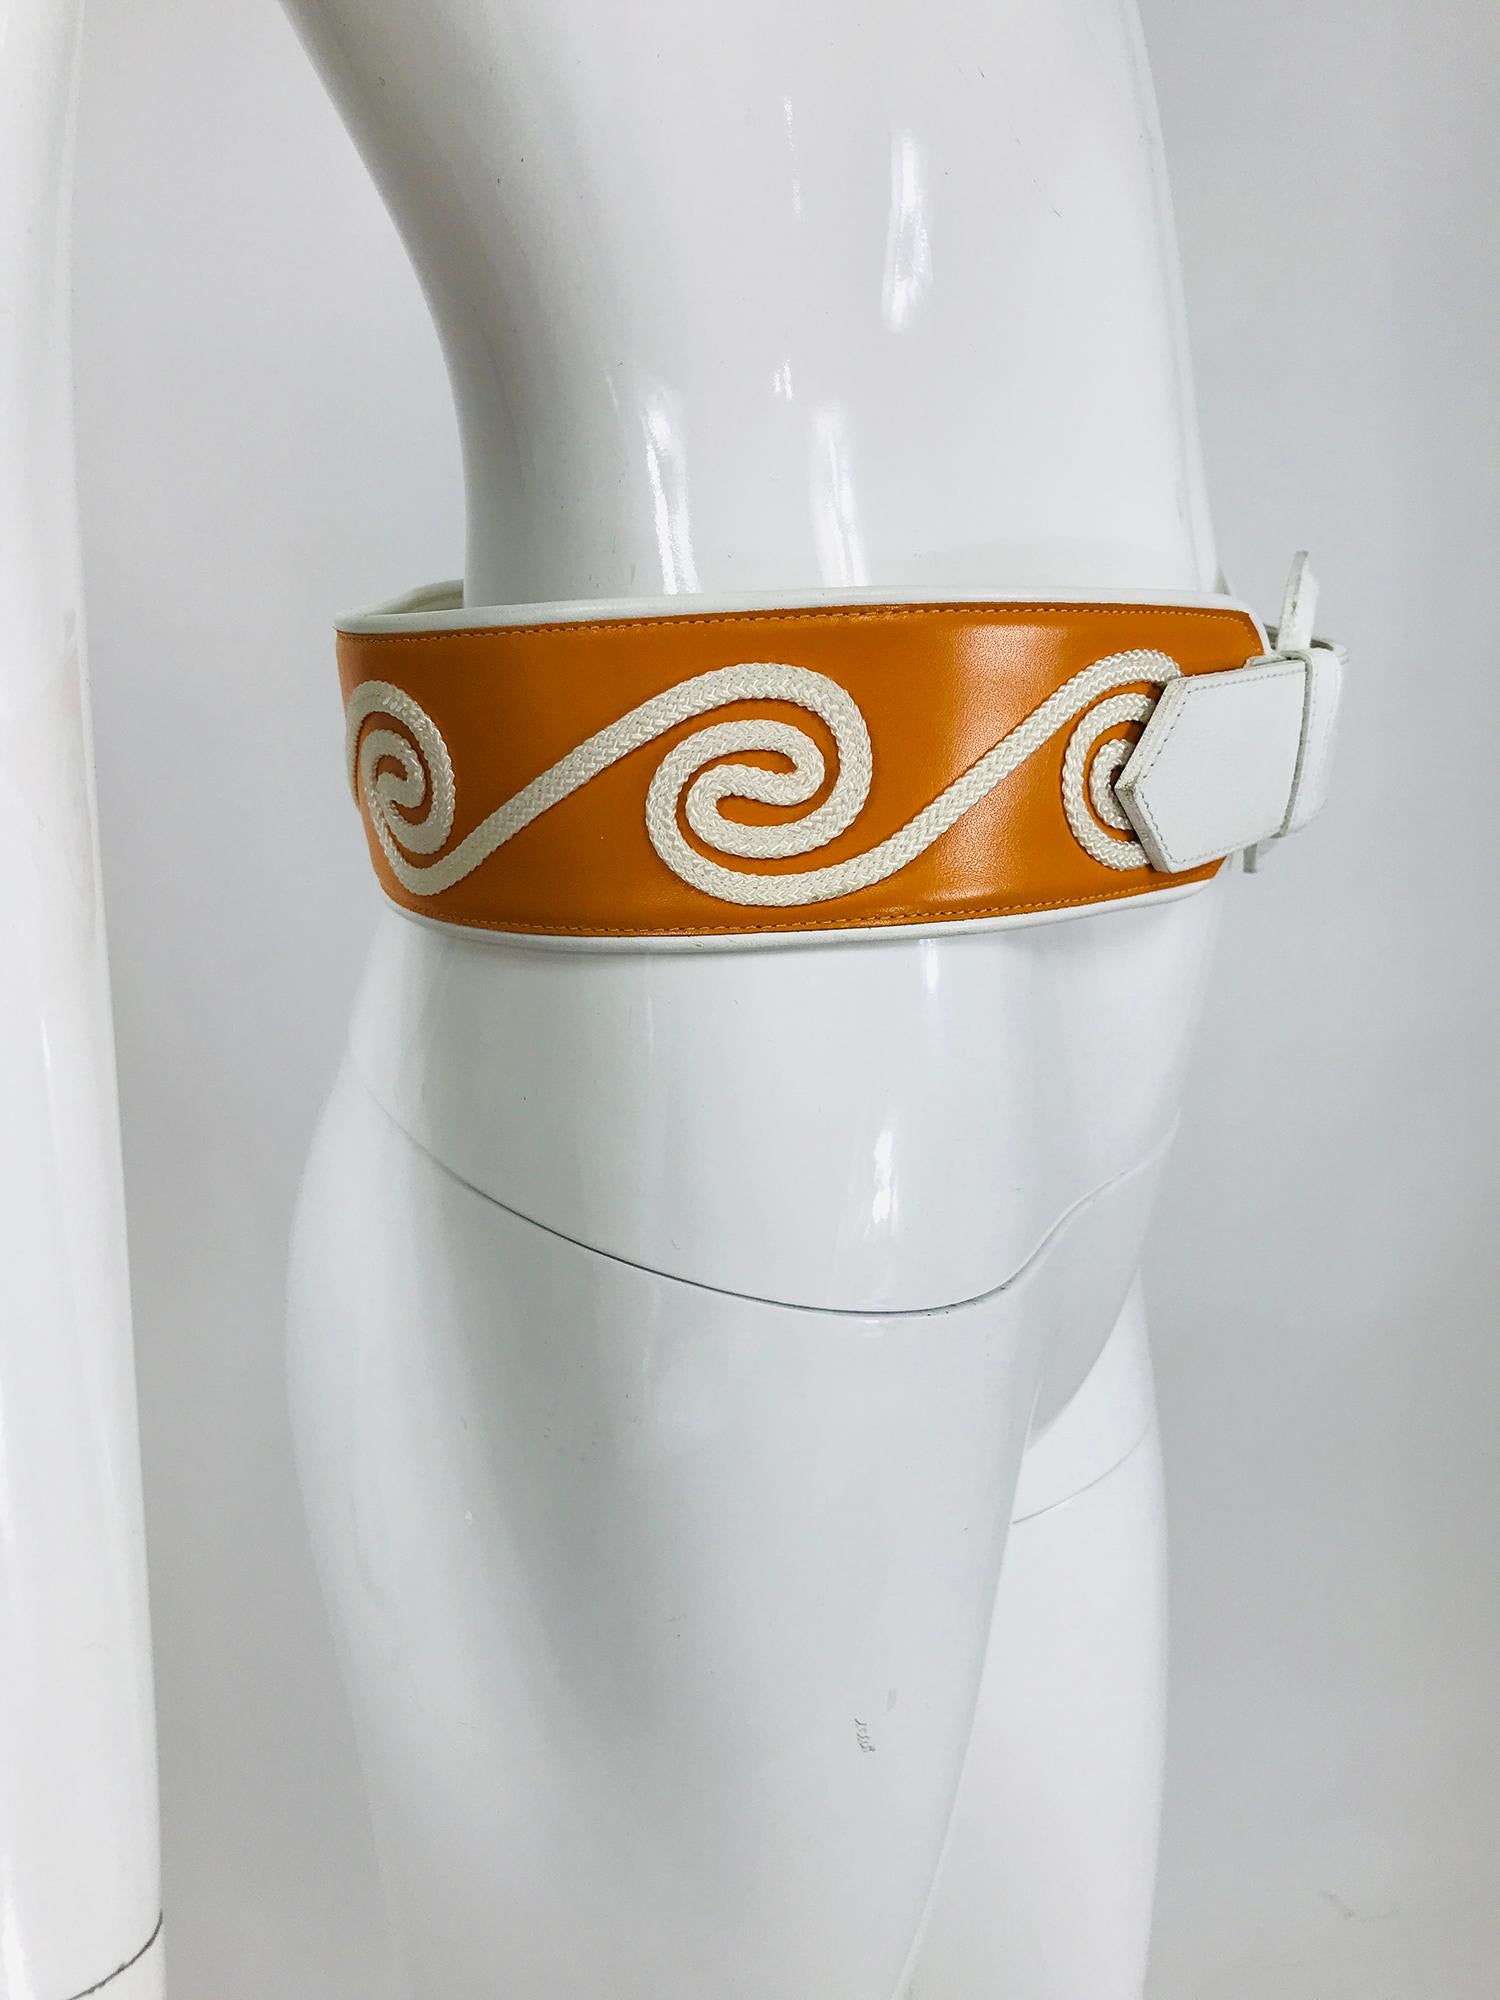  Christian Dior White & Golden Yellow Cord Applique Wide Leather Belt M-L 1990s In Good Condition For Sale In West Palm Beach, FL